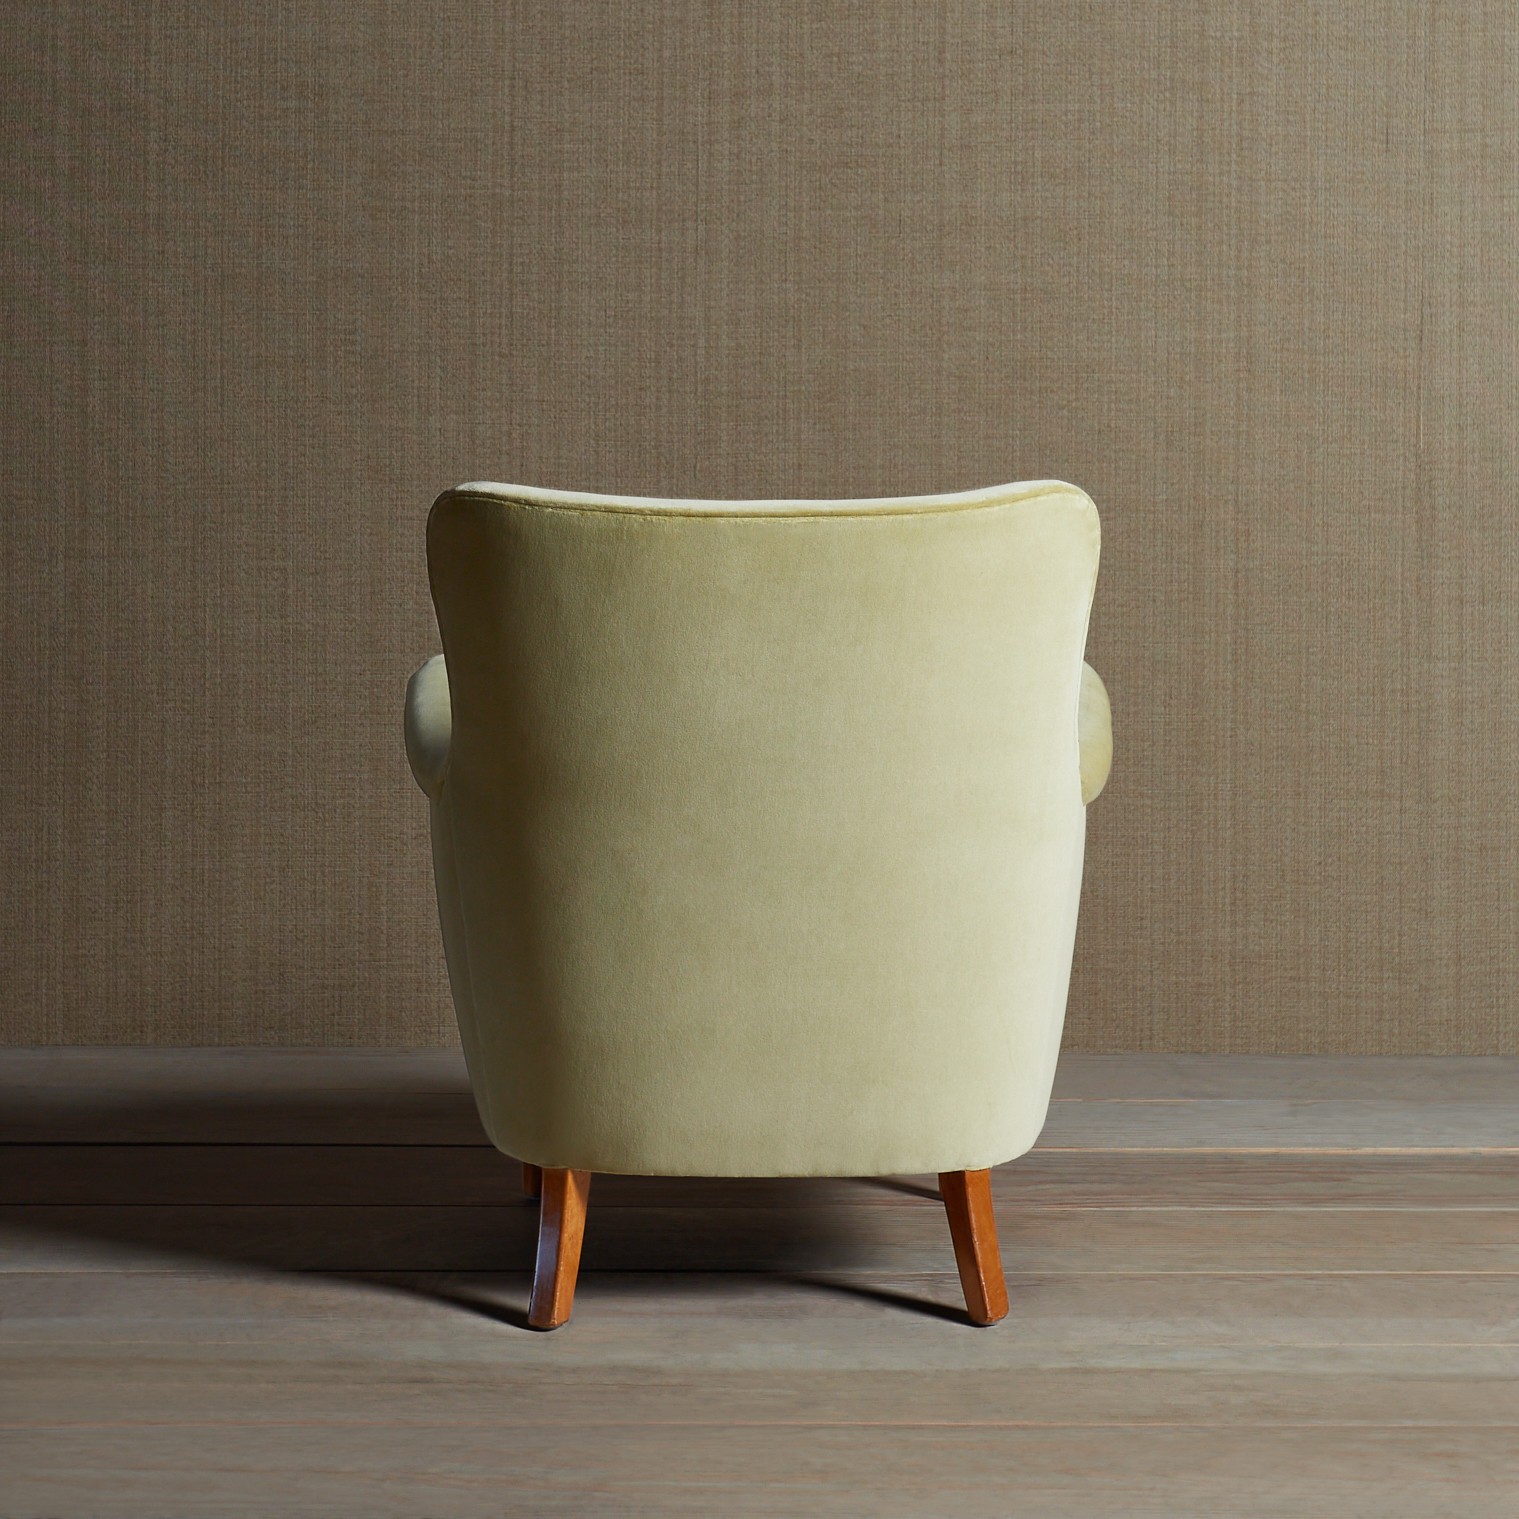 a chair with a wooden leg and a beige upholstered seat